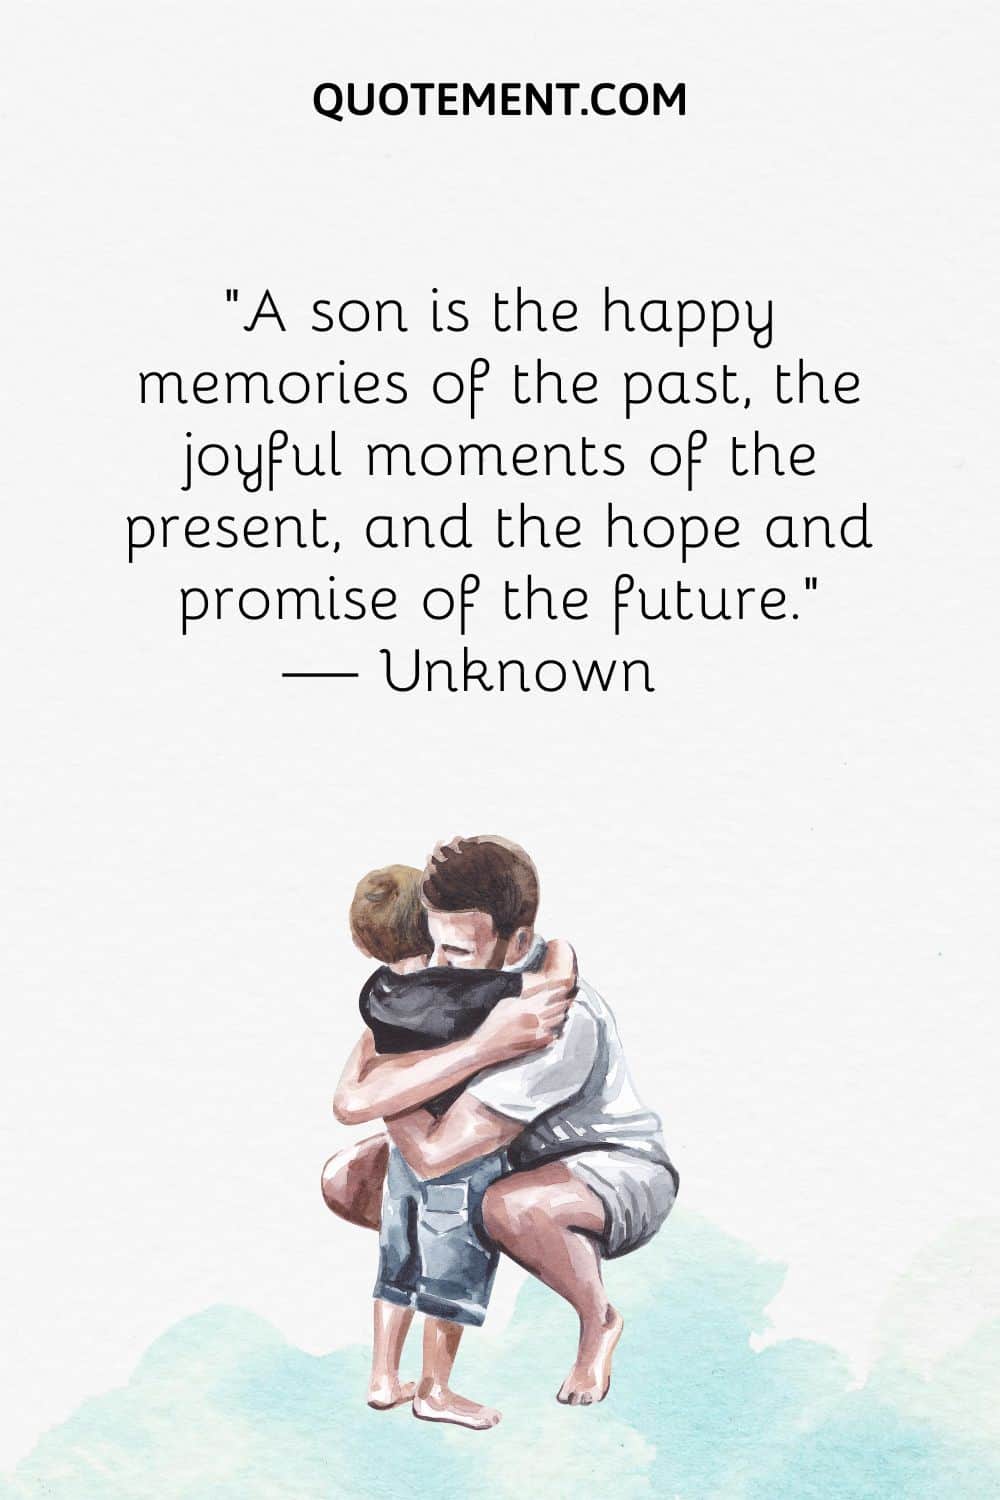 father and son hug image representing inspirational son quote